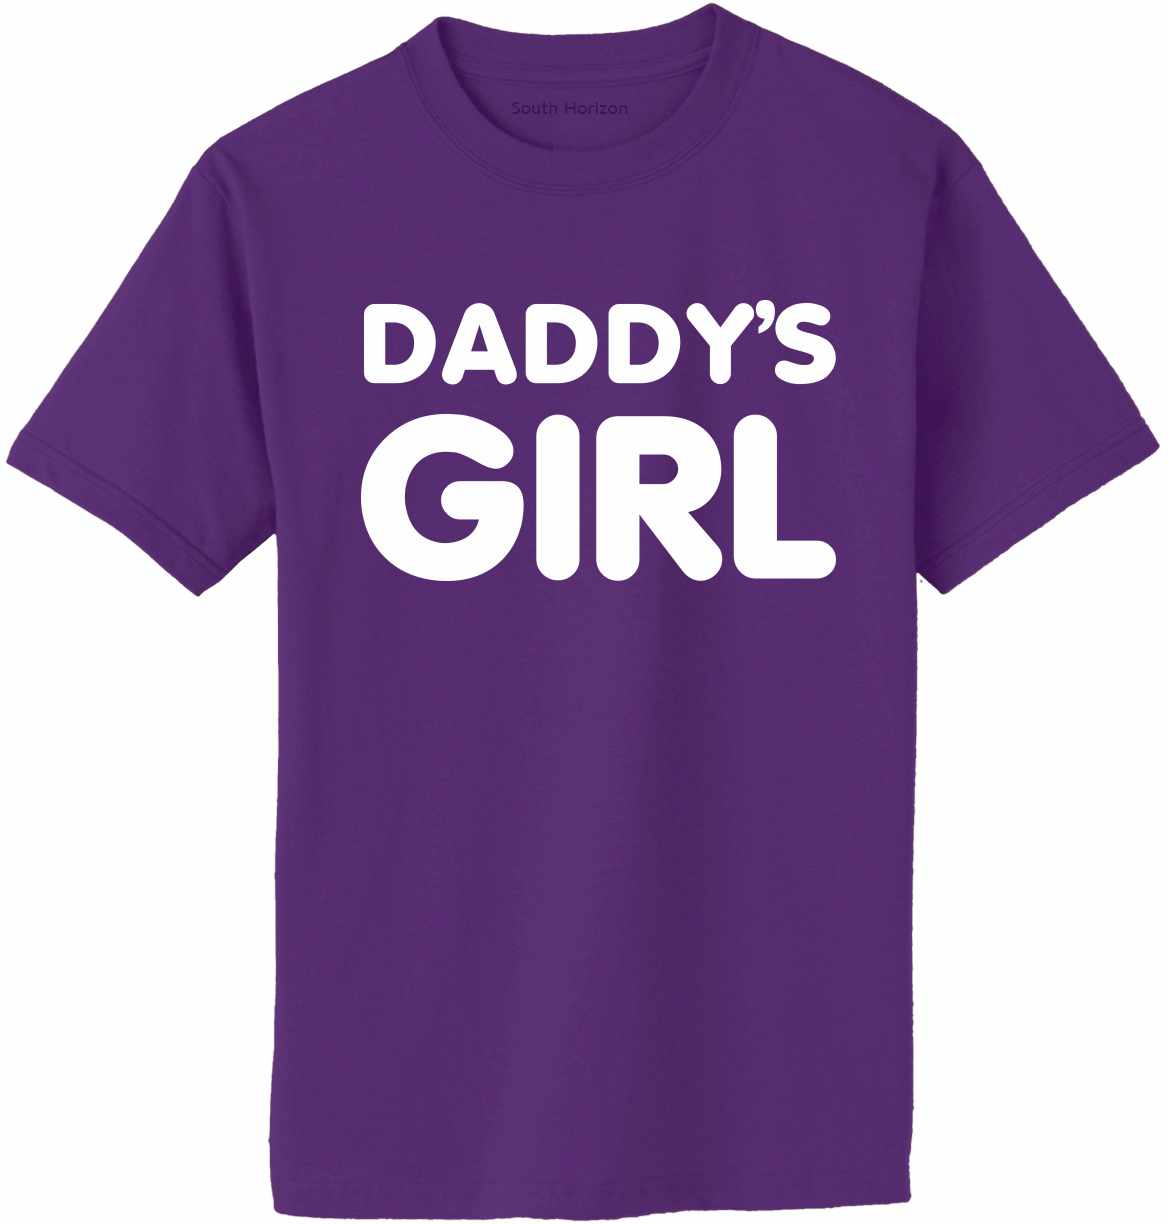 Daddy's Girl on Adult T-Shirt (#1218-1)